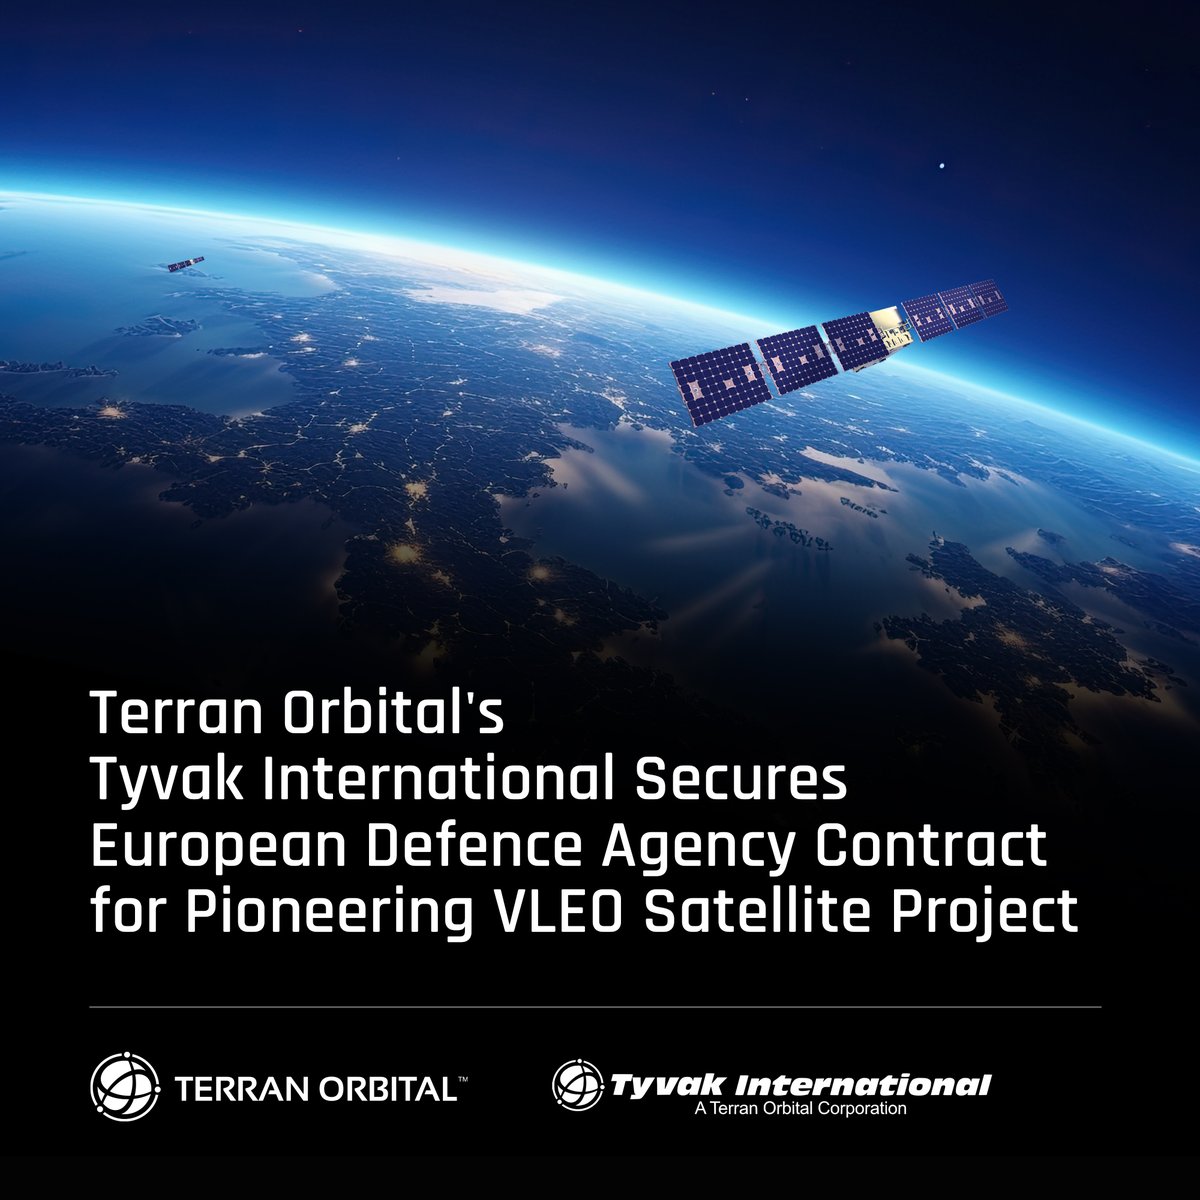 Tyvak International, a subsidiary of Terran Orbital Corporation, embarks on a groundbreaking journey with the European Defence Agency Hub for EU Defence Innovation. Stay tuned for the next phase as we lead the way in satellite design and development! #Tyvak #ESA #EDA #VLEO